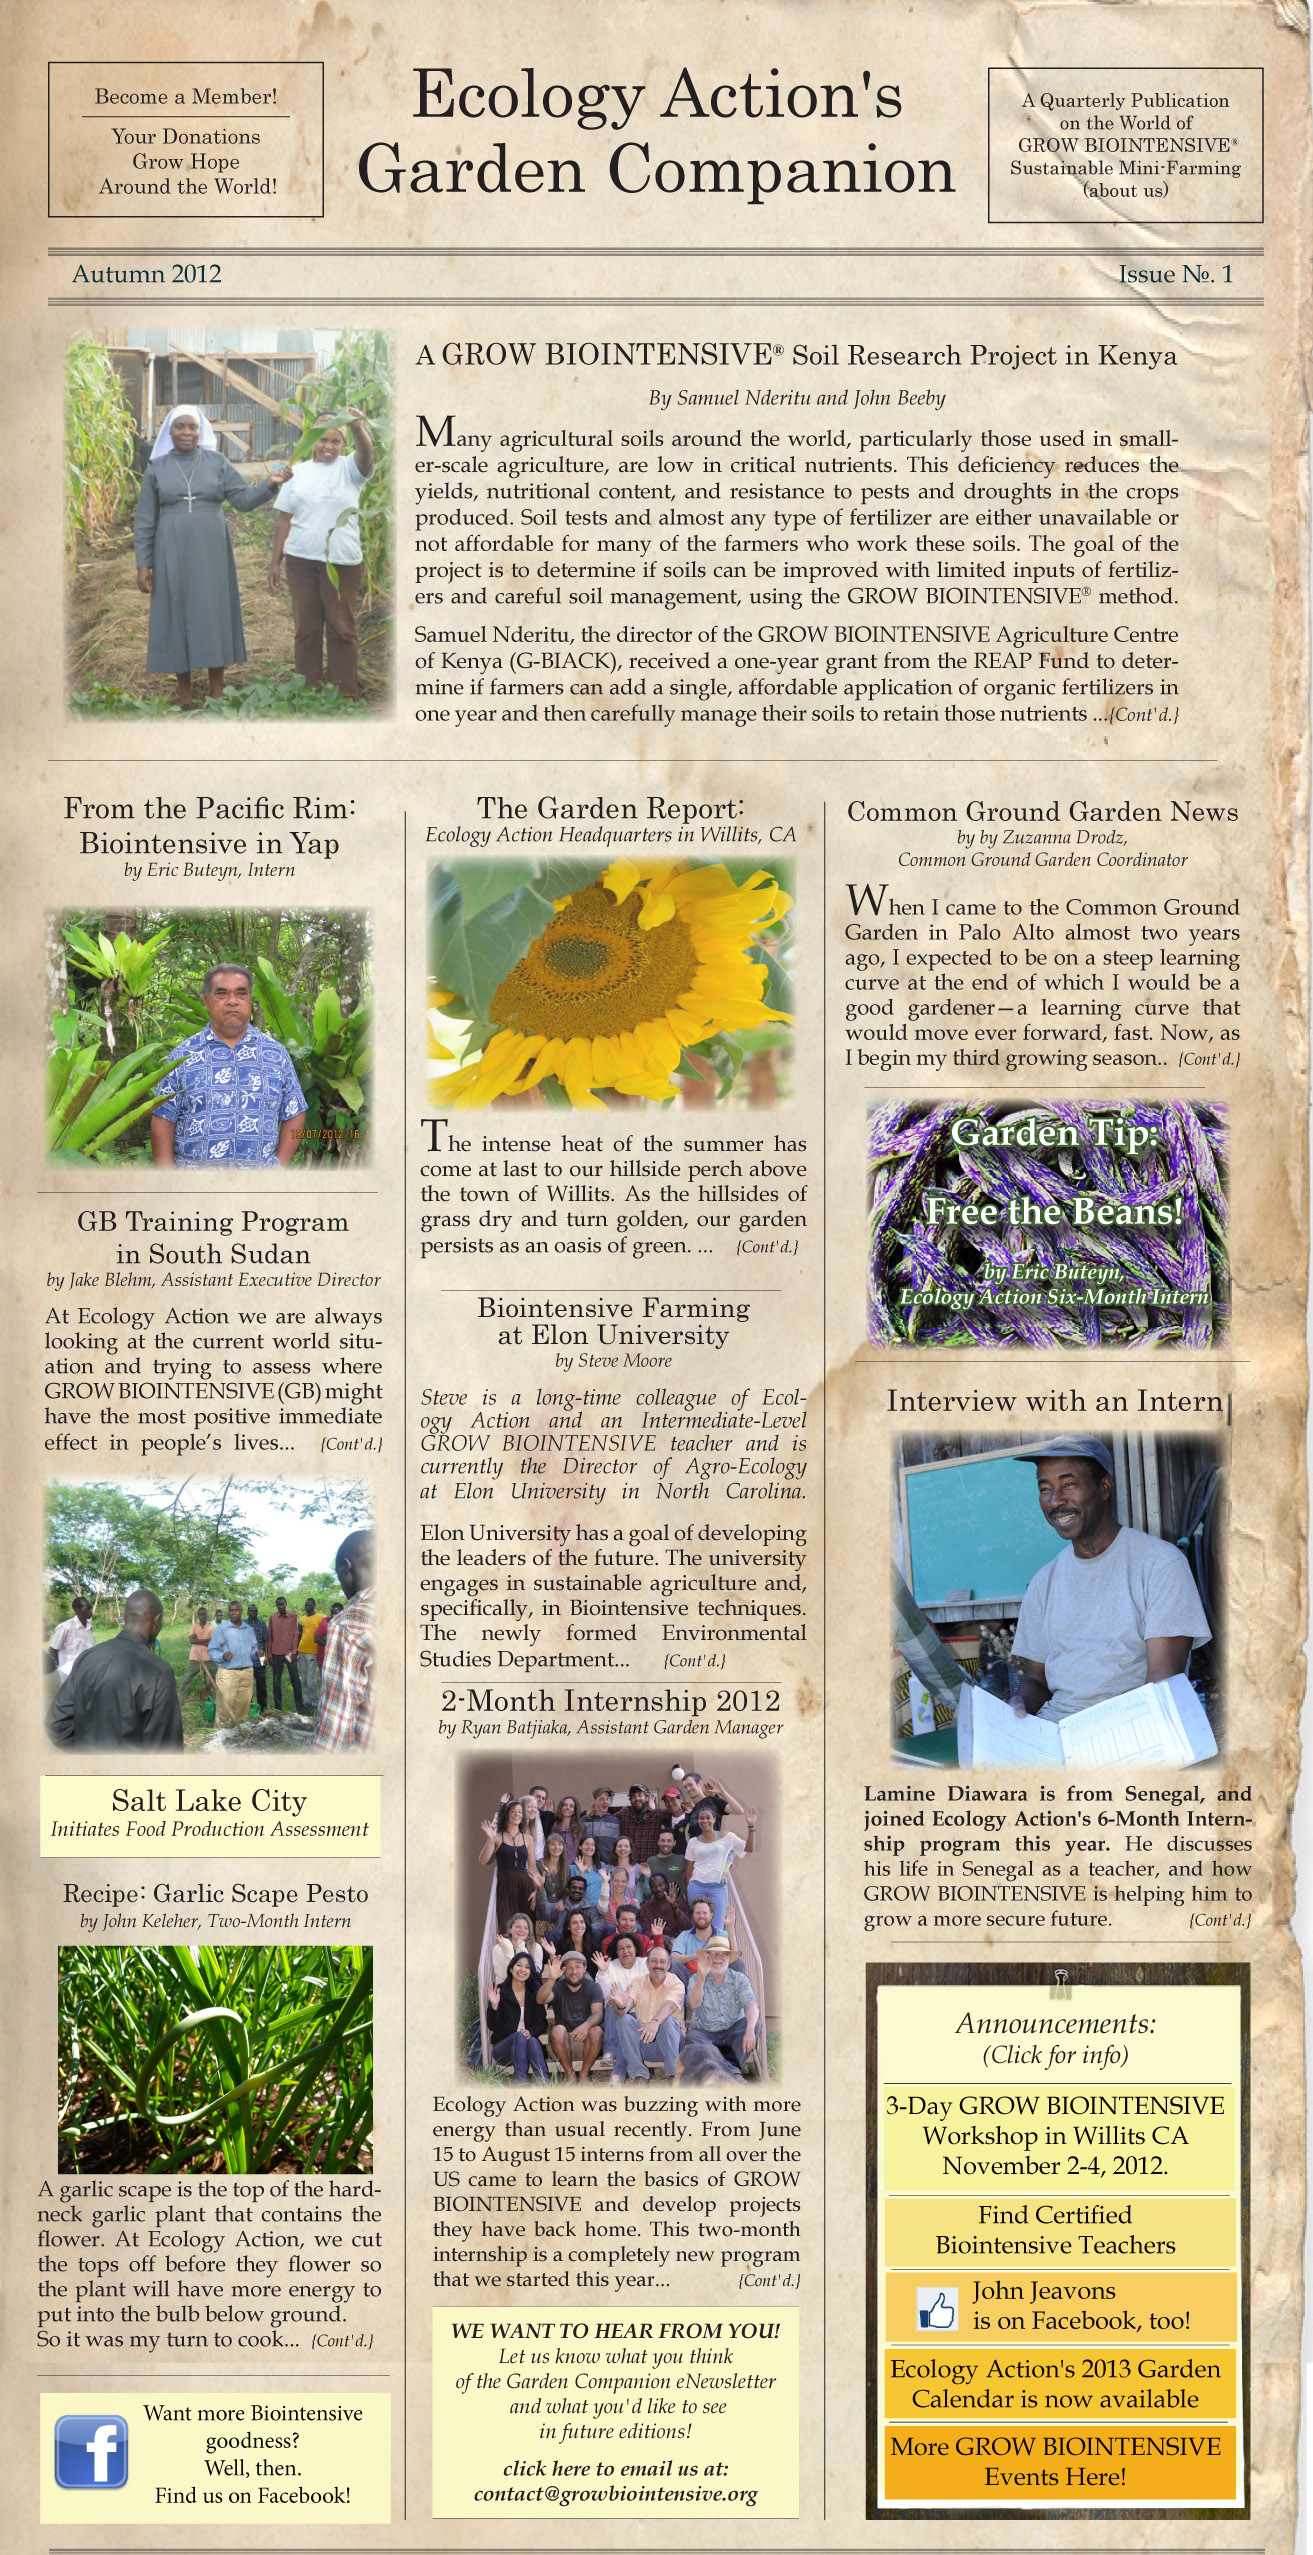 Ecology Action - The Garden Companion Newsletter 2012

Ecology Action is a 501(c)(3) non-profit organization and has been teaching people worldwide to better feed themselves while building the soil and conserving resources since 1971. 
Bountiful Gardens and Common Ground Center are projects of Ecology Action.

This is the first edition of our quarterly e-newsletter and we hope you like it!
Read it online at http://www.growbiointensive.org/Enewsletter
___________________________________________
Articles in this issue:

A GROW BIOINTENSIVE Soil Research Project in Kenya
Read the article at http://www.growbiointensive.org/Enewsletter/Kenya.html

From the Pacific Rim: Biointensive on the Island of Yap
Read the article at http://www.growbiointensive.org/Enewsletter/Yap.html

The GROW BIOINTENSIVE Training Program in South Sudan
Read the article at http://www.growbiointensive.org/Enewsletter/SouthSudan.html

Biointensive Farming Taught at Elon University, Elon, NC
Read the article at http://www.growbiointensive.org/Enewsletter/Elon.html

Ecology Action's Garden Report from Willits, CA
Read the article at http://www.growbiointensive.org/Enewsletter/GardenReport.html

Salt Lake City Begins Food Production Assessment
Read the article at http://www.growbiointensive.org/Enewsletter/Utah.html

Common Ground Garden News from Palo Alto, CA
Read the article at http://www.growbiointensive.org/Enewsletter/CommonGround.html

About the 2-Month Summer Internship 
Read the article at http://www.growbiointensive.org/Enewsletter/Internship.html

Interview with Lamine Diawara, Intern from Senegal
Read the article at http://www.growbiointensive.org/Enewsletter/Lamine.html

Garden Tip: Free the Beans!
Read the article at http://www.growbiointensive.org/Enewsletter/GardenTip.html

Recipe: Garlic Scape Pesto
Read the article at http://www.growbiointensive.org/Enewsletter/Recipe.html

Announcements: Next 3-Day Workshop: November 2-4, 2012, Certified GB Teachers, John Jeavons on Facebook, Ecology Action's 2013 Garden Calendar is here.
Read more at http://www.growbiointensive.org/Enewsletter